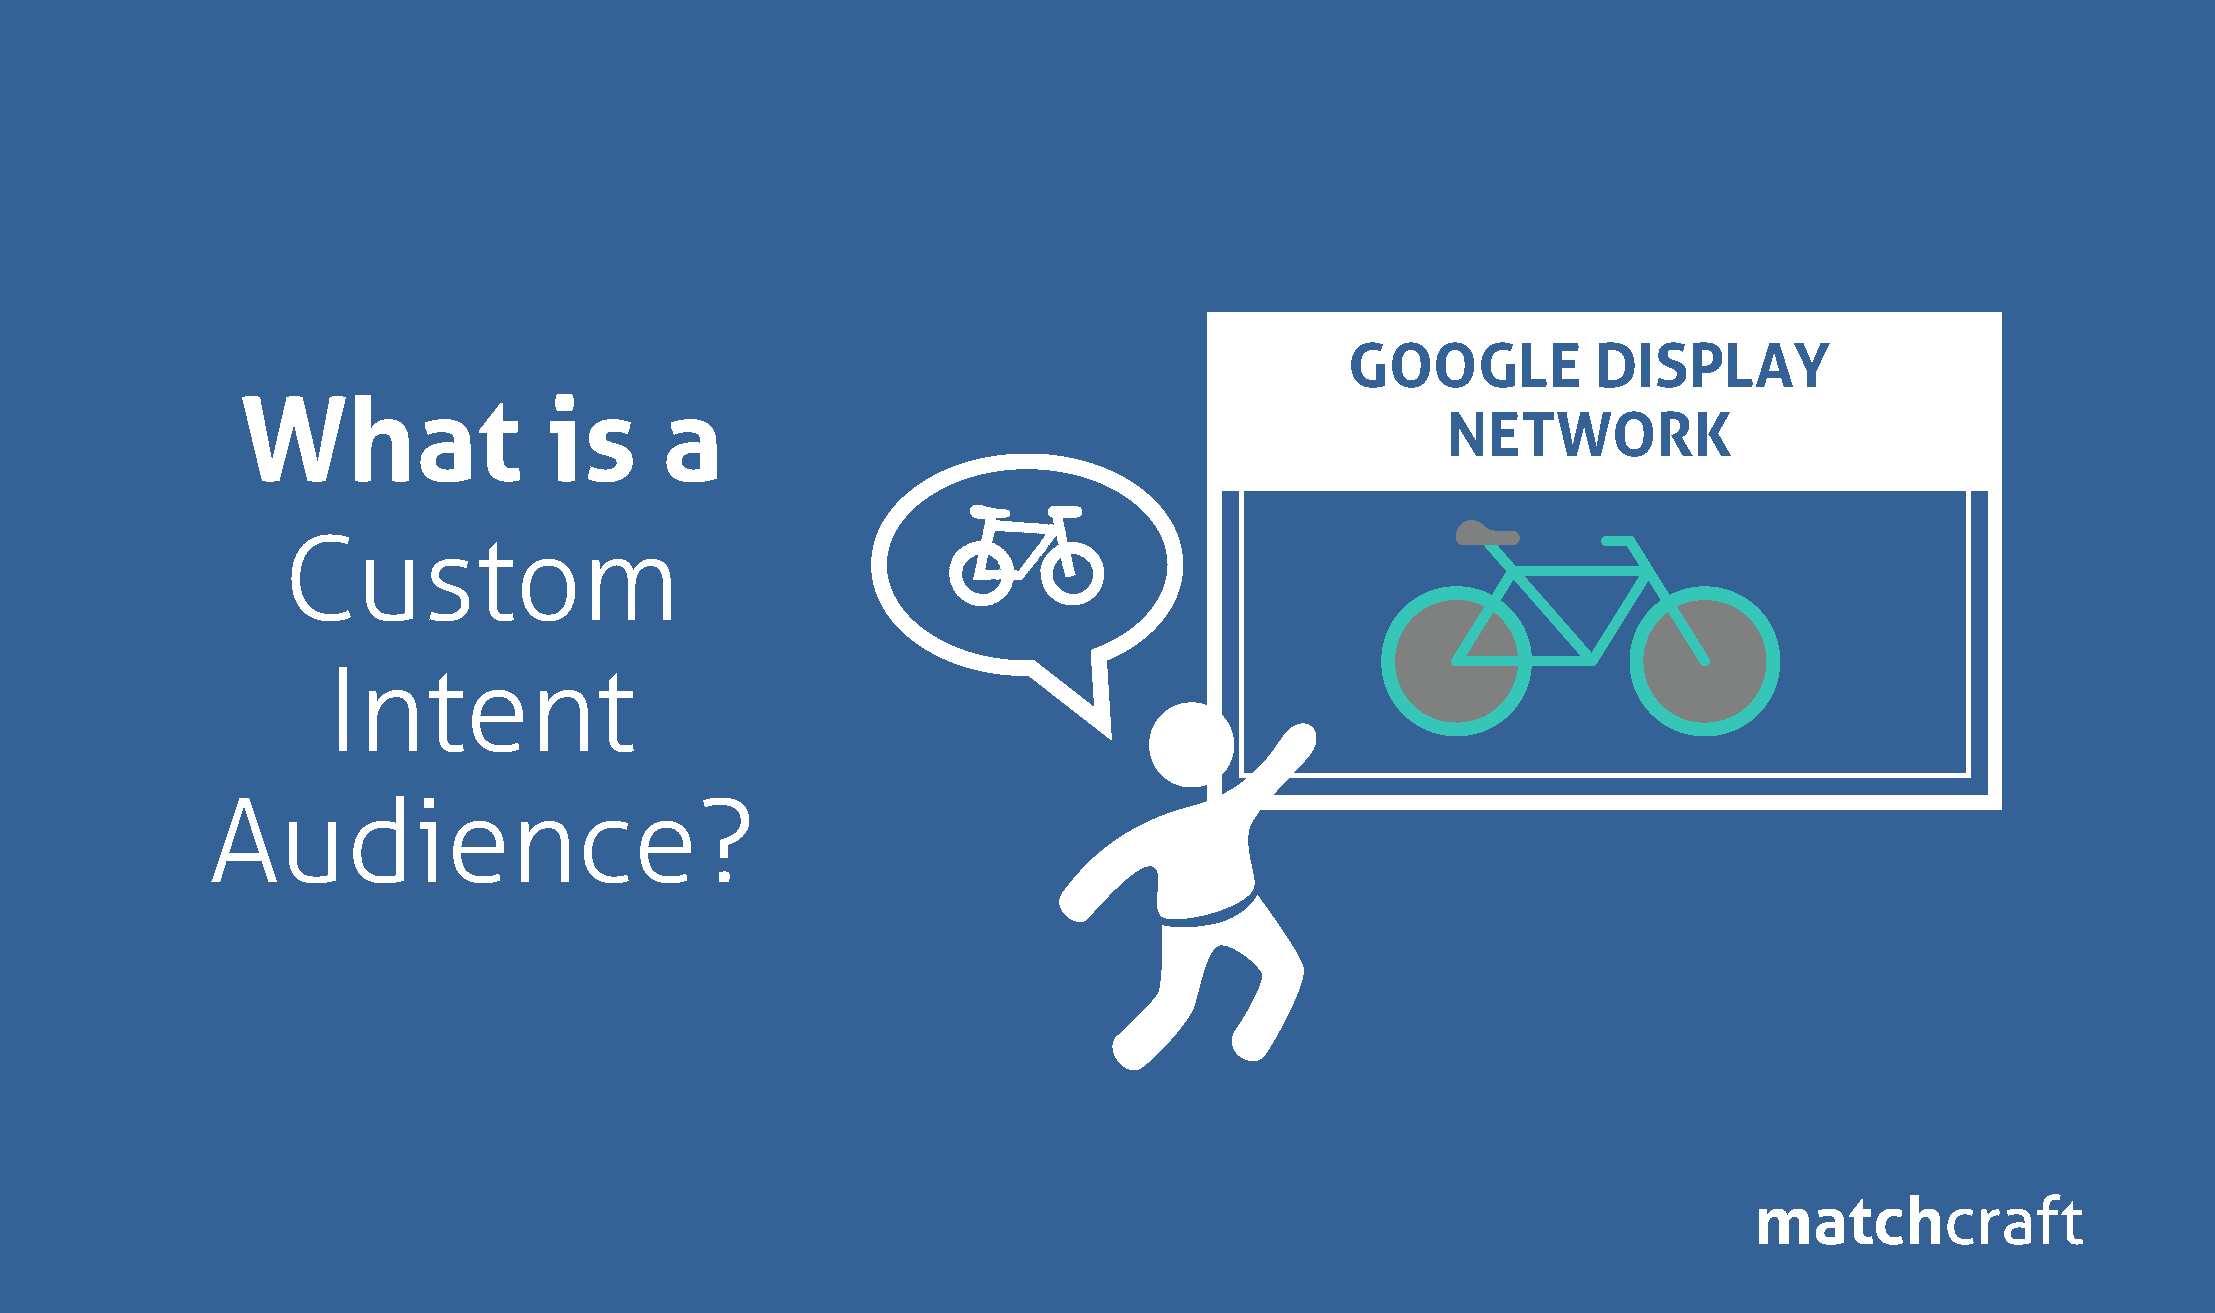 What is a Custom Intent Audience?